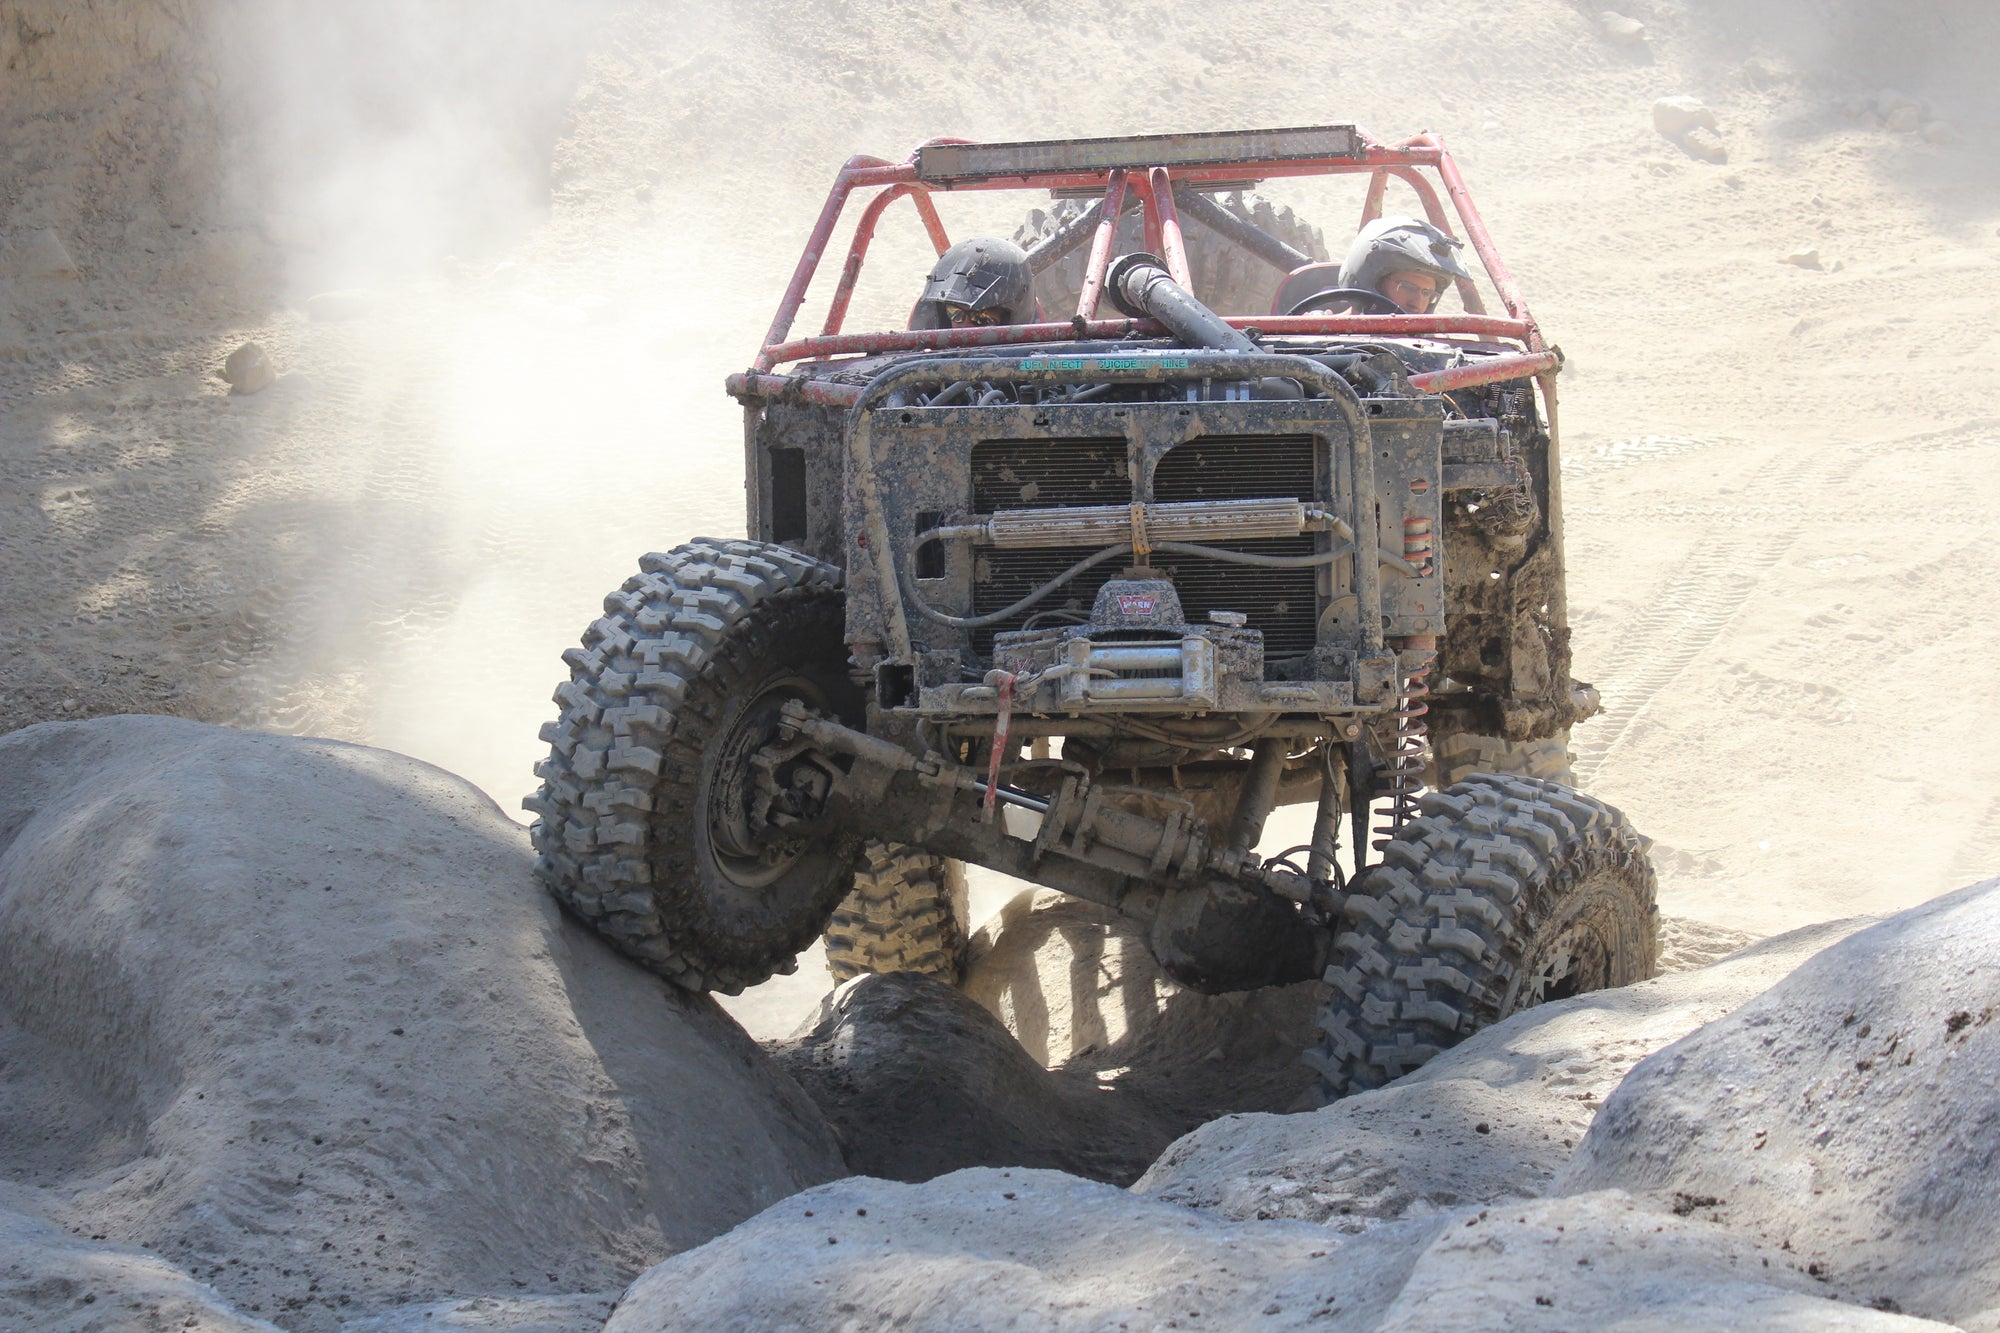 Rev Up Your Adventure: Panhandle Overland Rally & More Updates from Heavy Metal Off-Road